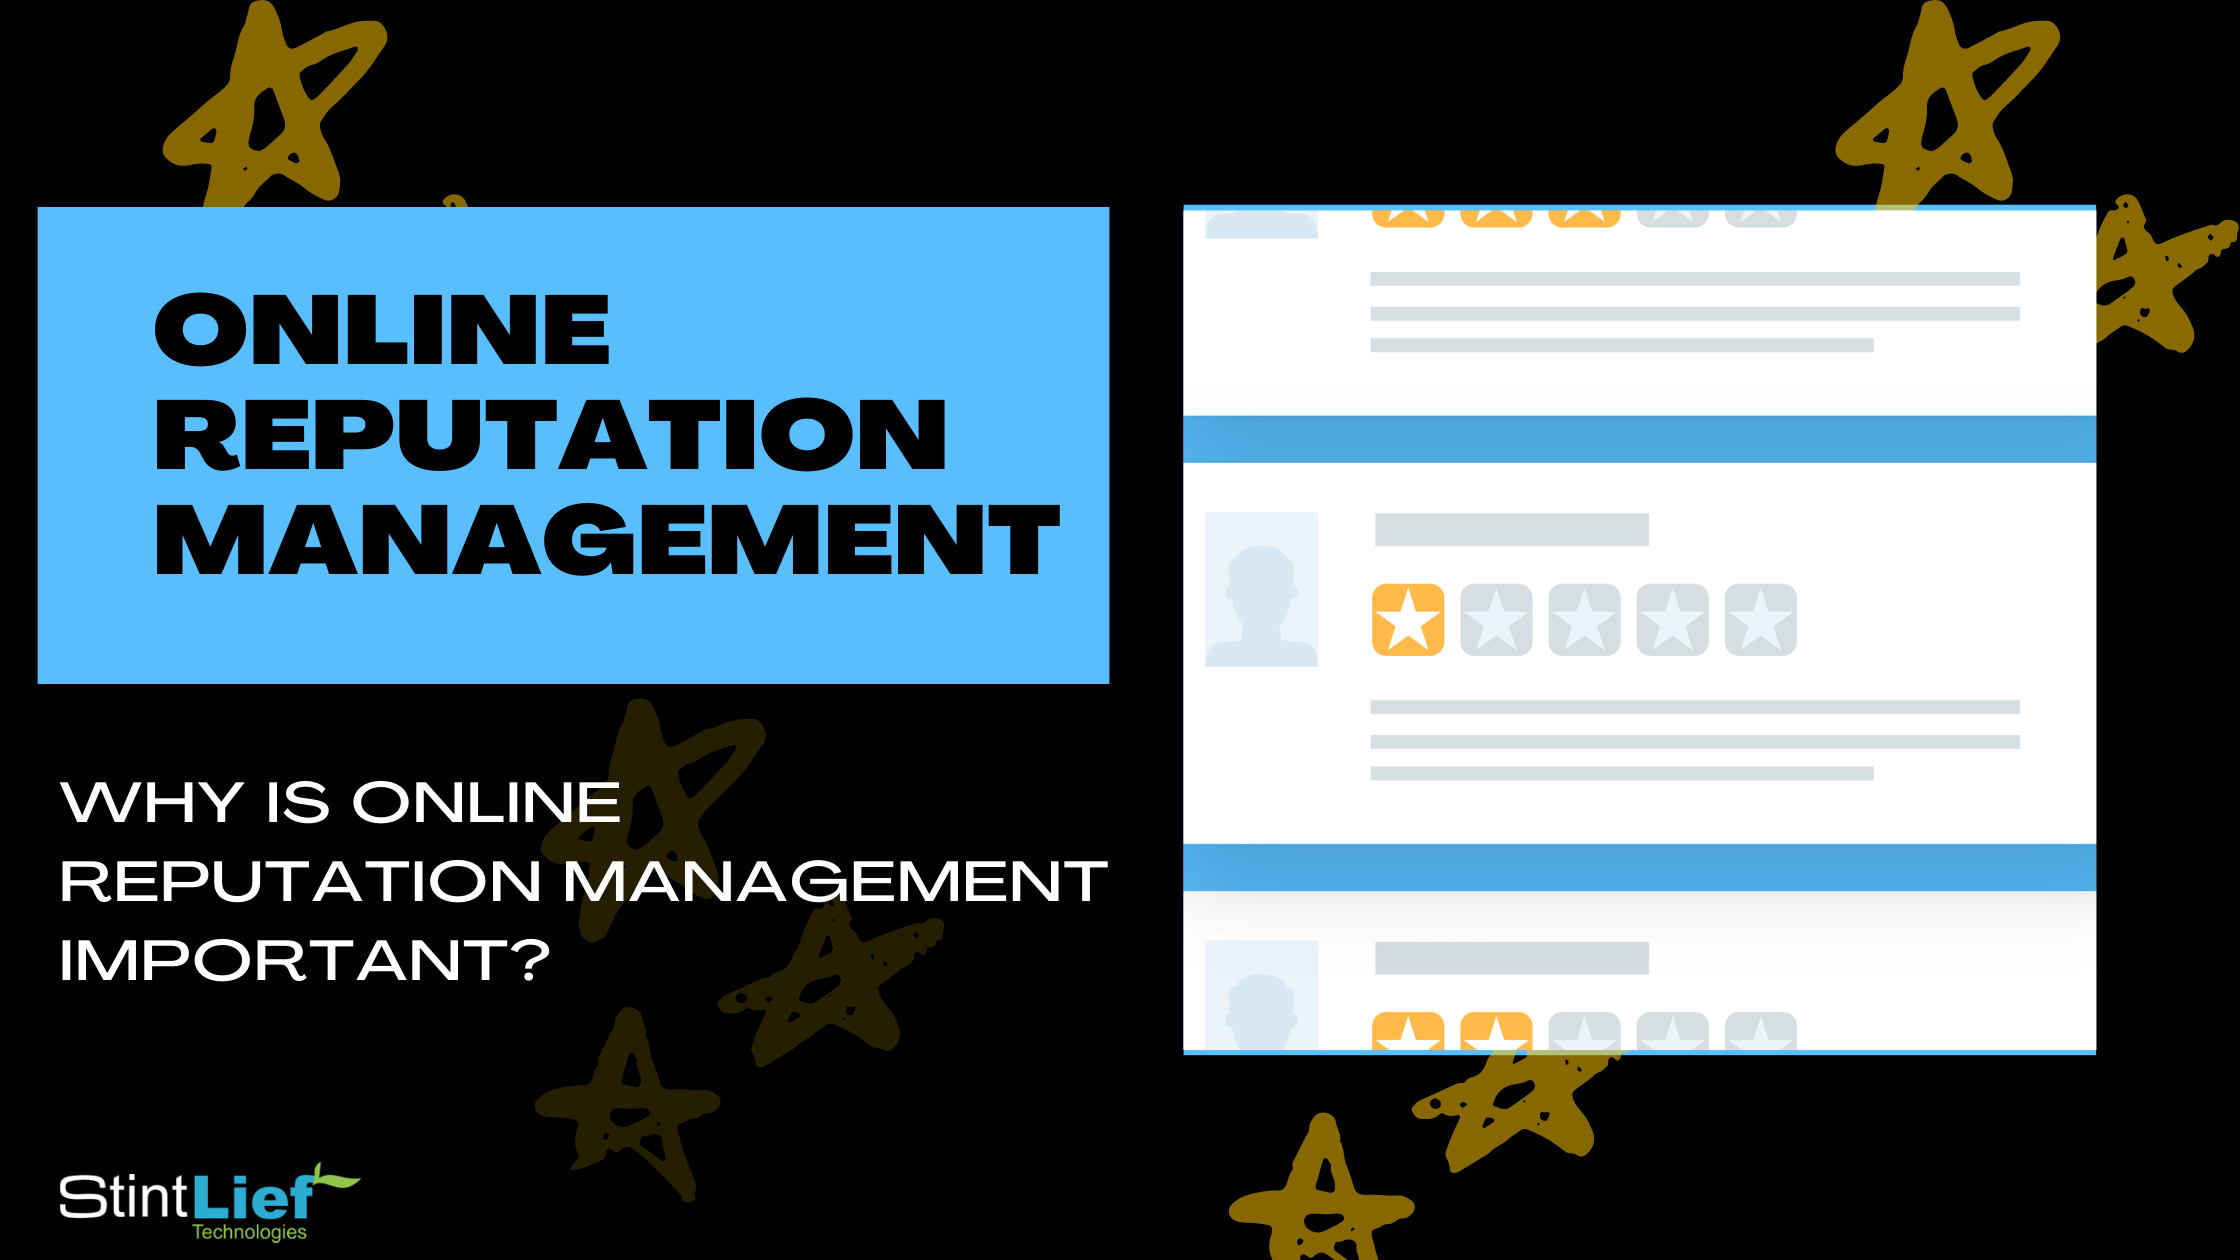 Why is Online Reputation Management important?